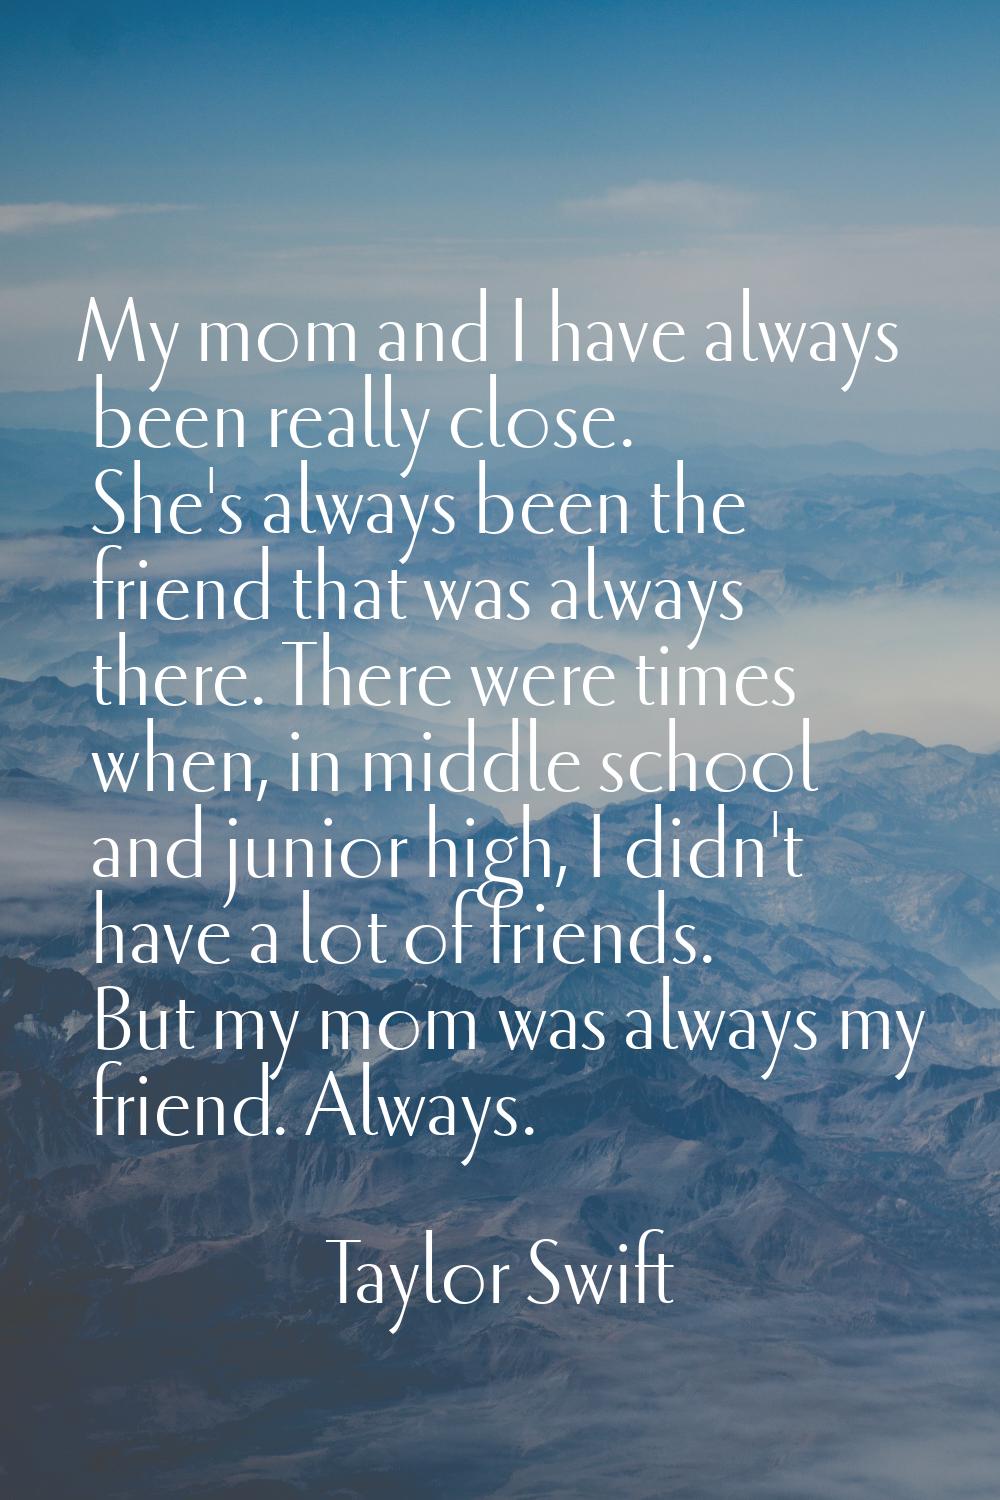 My mom and I have always been really close. She's always been the friend that was always there. The